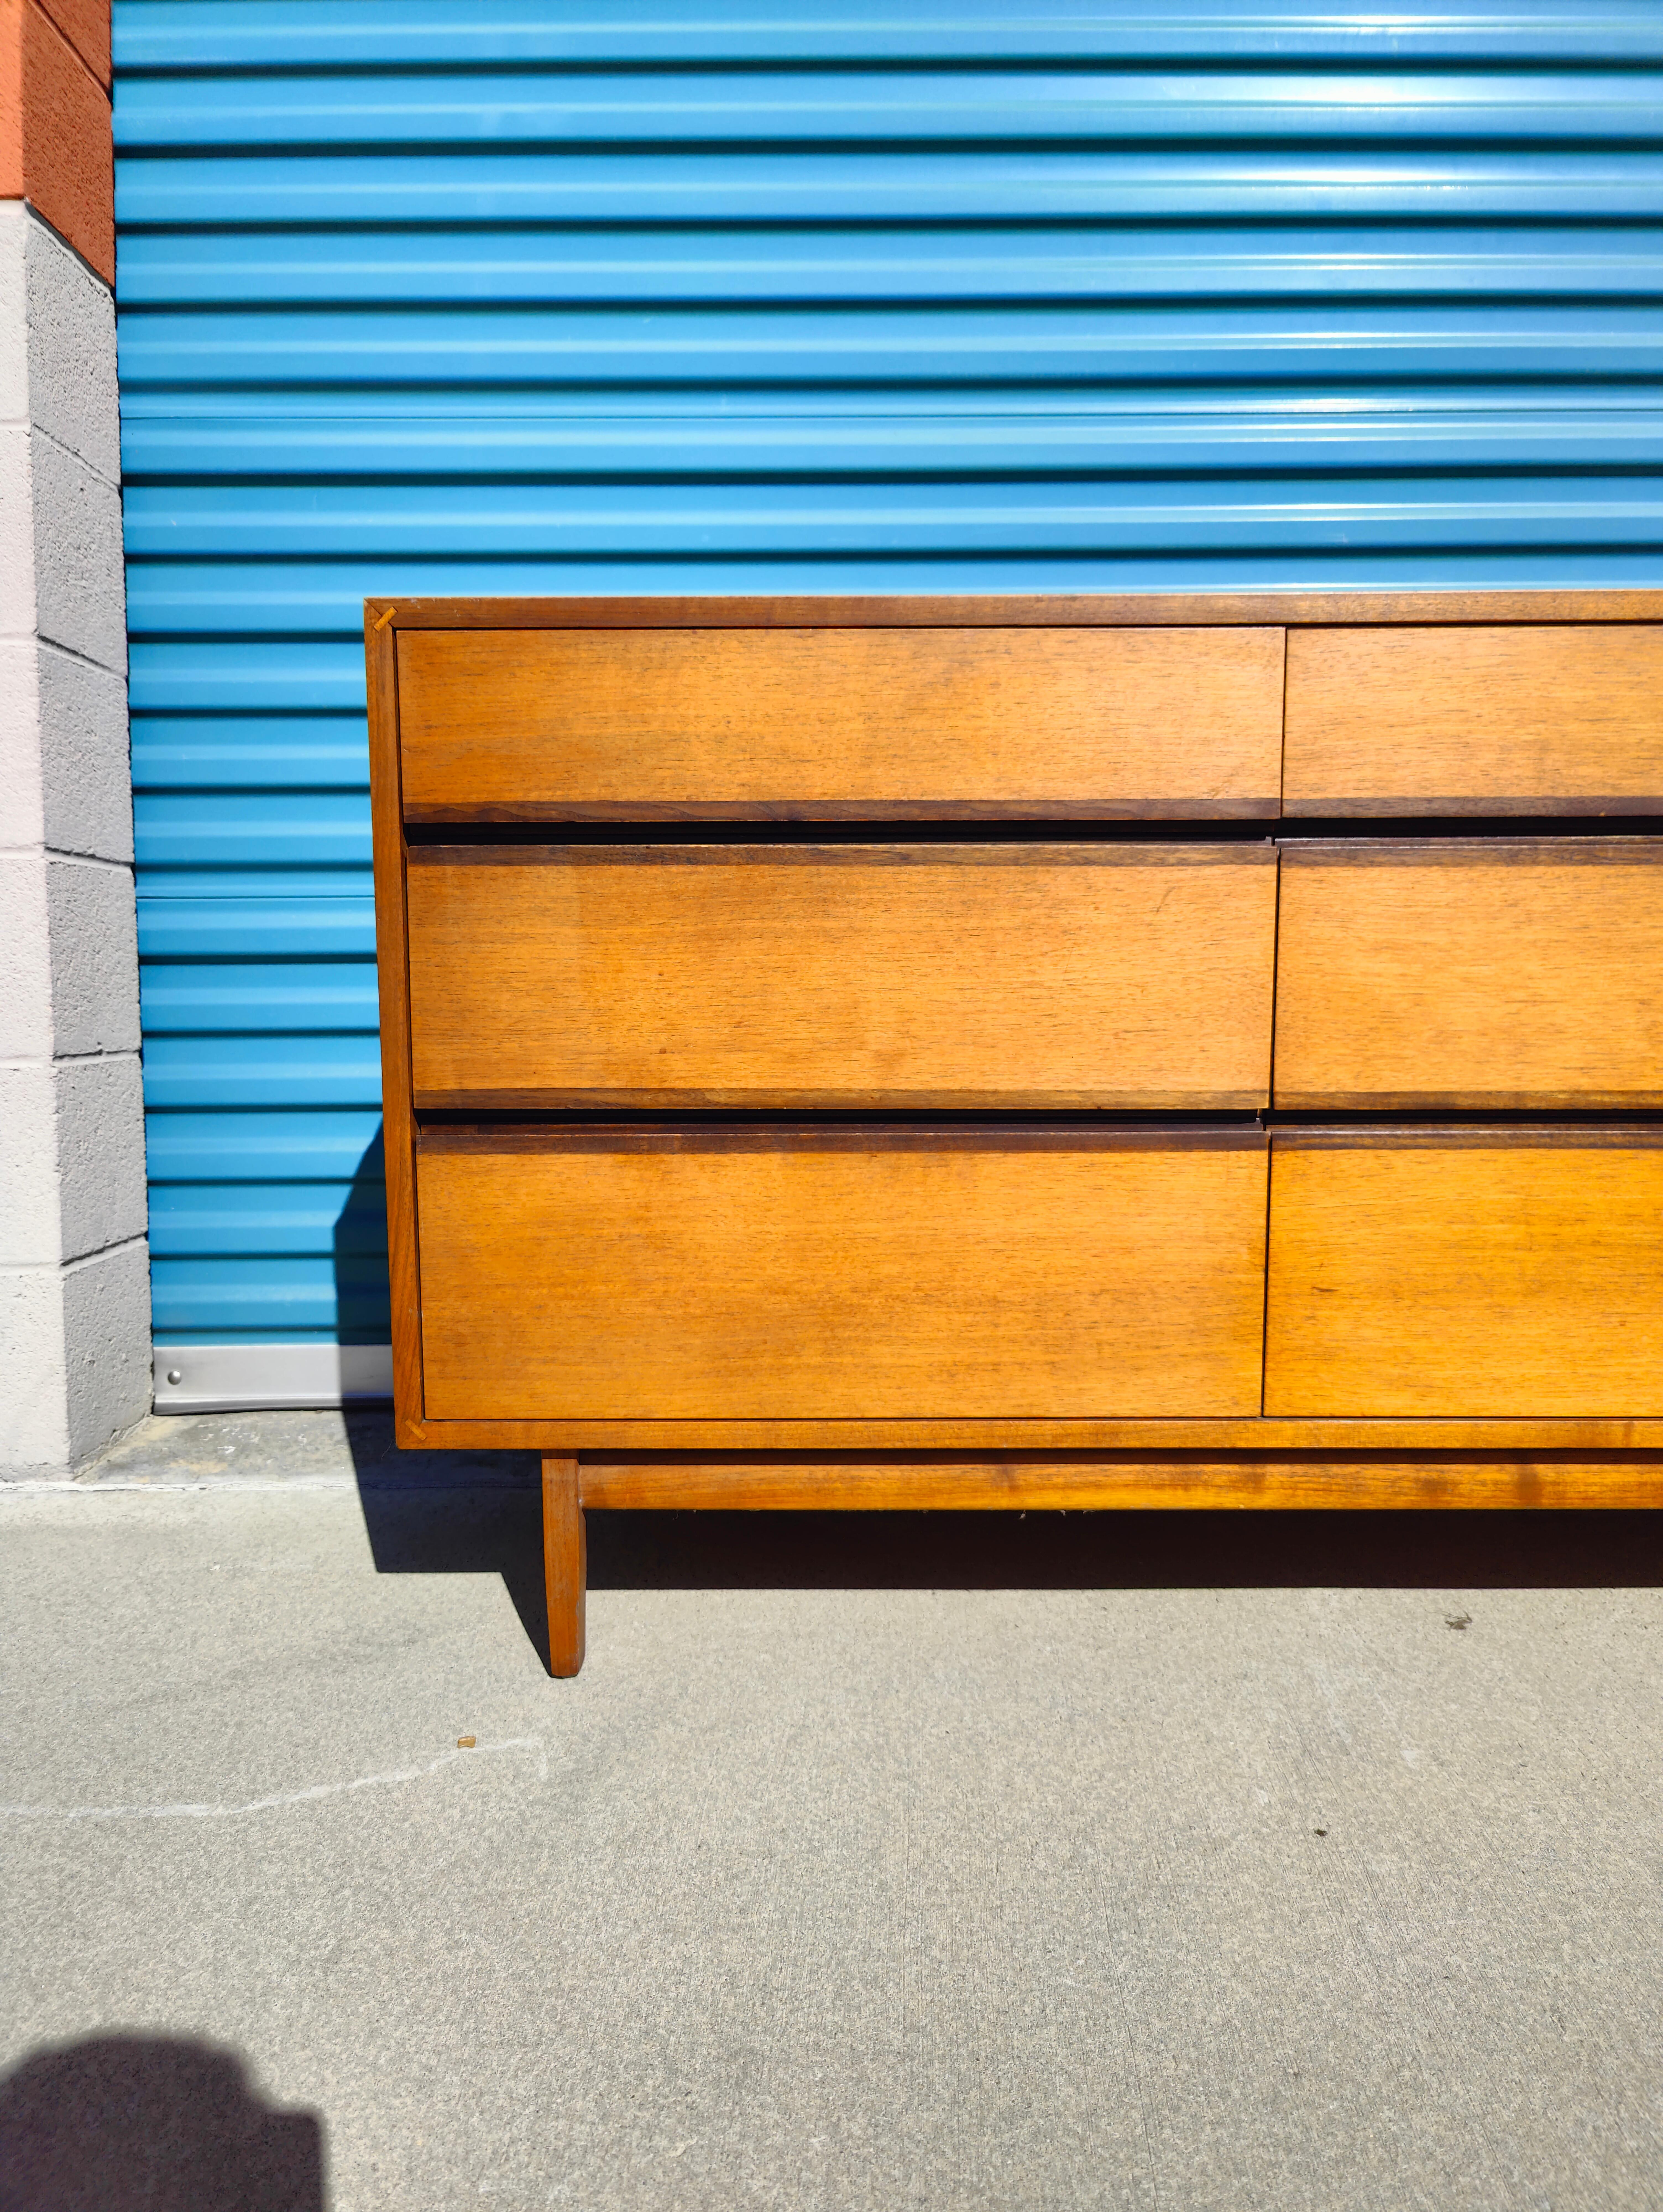 Now available is an amazing dresser/credenza designed by Kipp Stewart for Calvin Furniture c1950s. Features a walnut finish with cane doors. It offers lots of room for storage with adjustable shelves behind the two caned doors. Measures 72w x 17d x